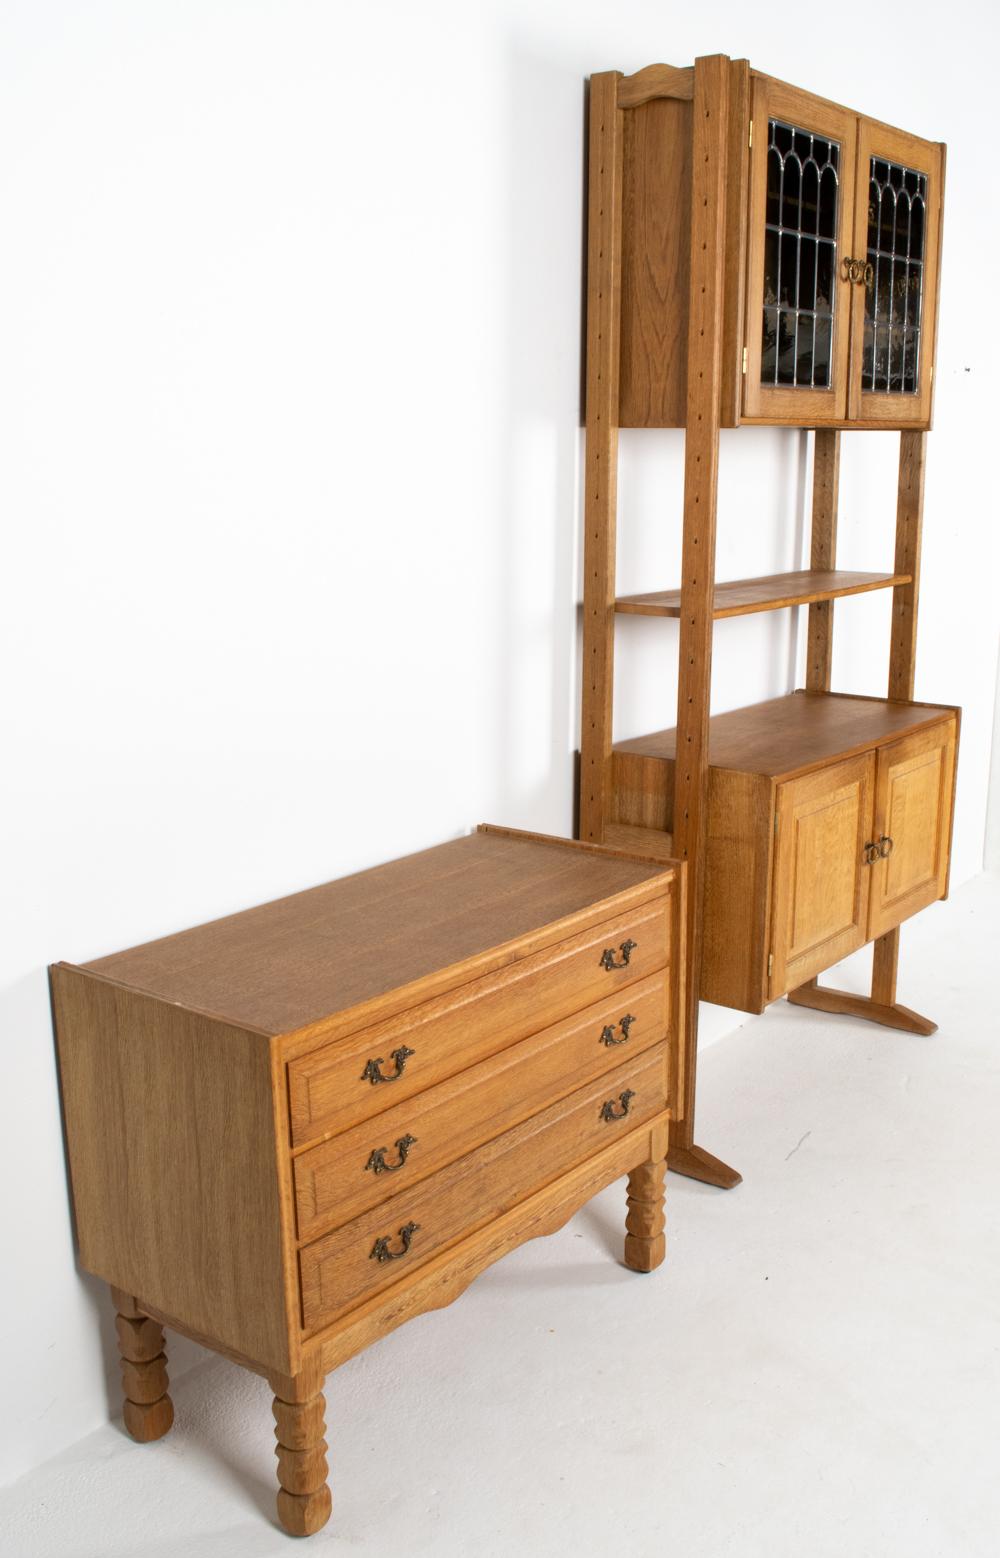 Danish Oak Wall System in the Manner of Henning Kjærnulf, C. 1970s For Sale 2